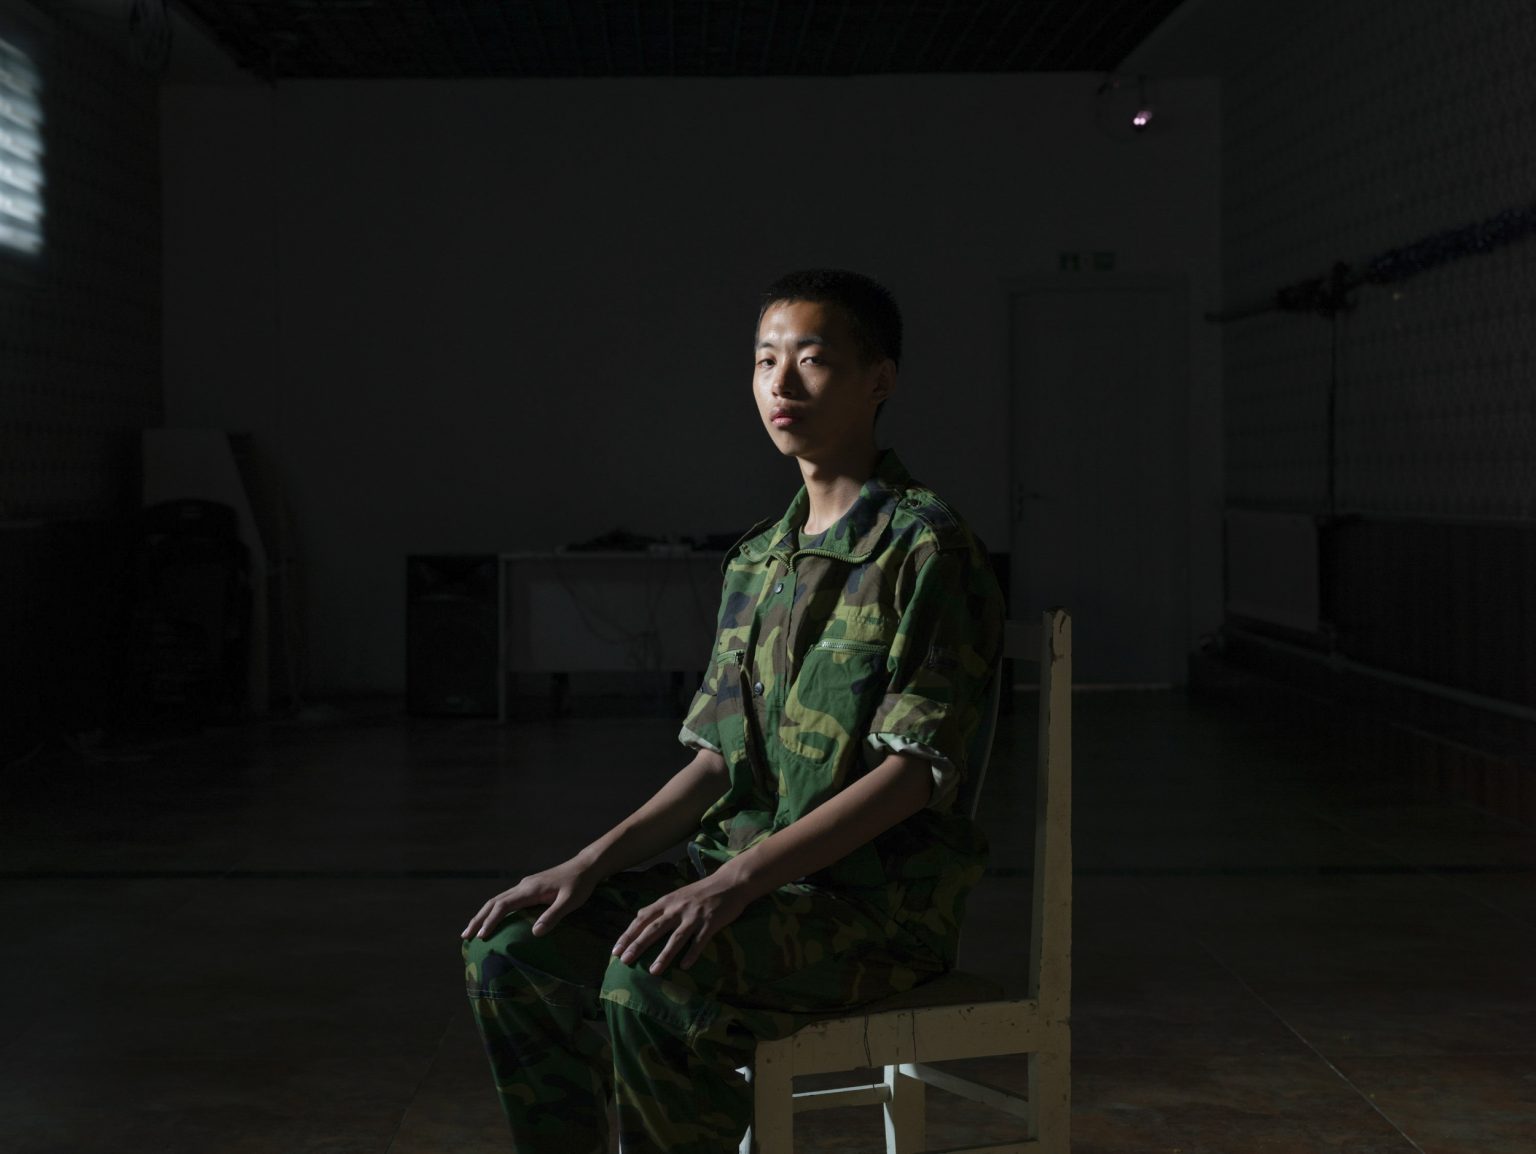 China, Jinan, Shandong province, October 2015: portrait of Dong Xiao Shuai, a 15 years old boy in the "Ya Bo center", a military boot-camp for reeducation of young people who are suffering from excessive online game playing. Dong Xiao Shuai is living in the boot-camp since 1 months.